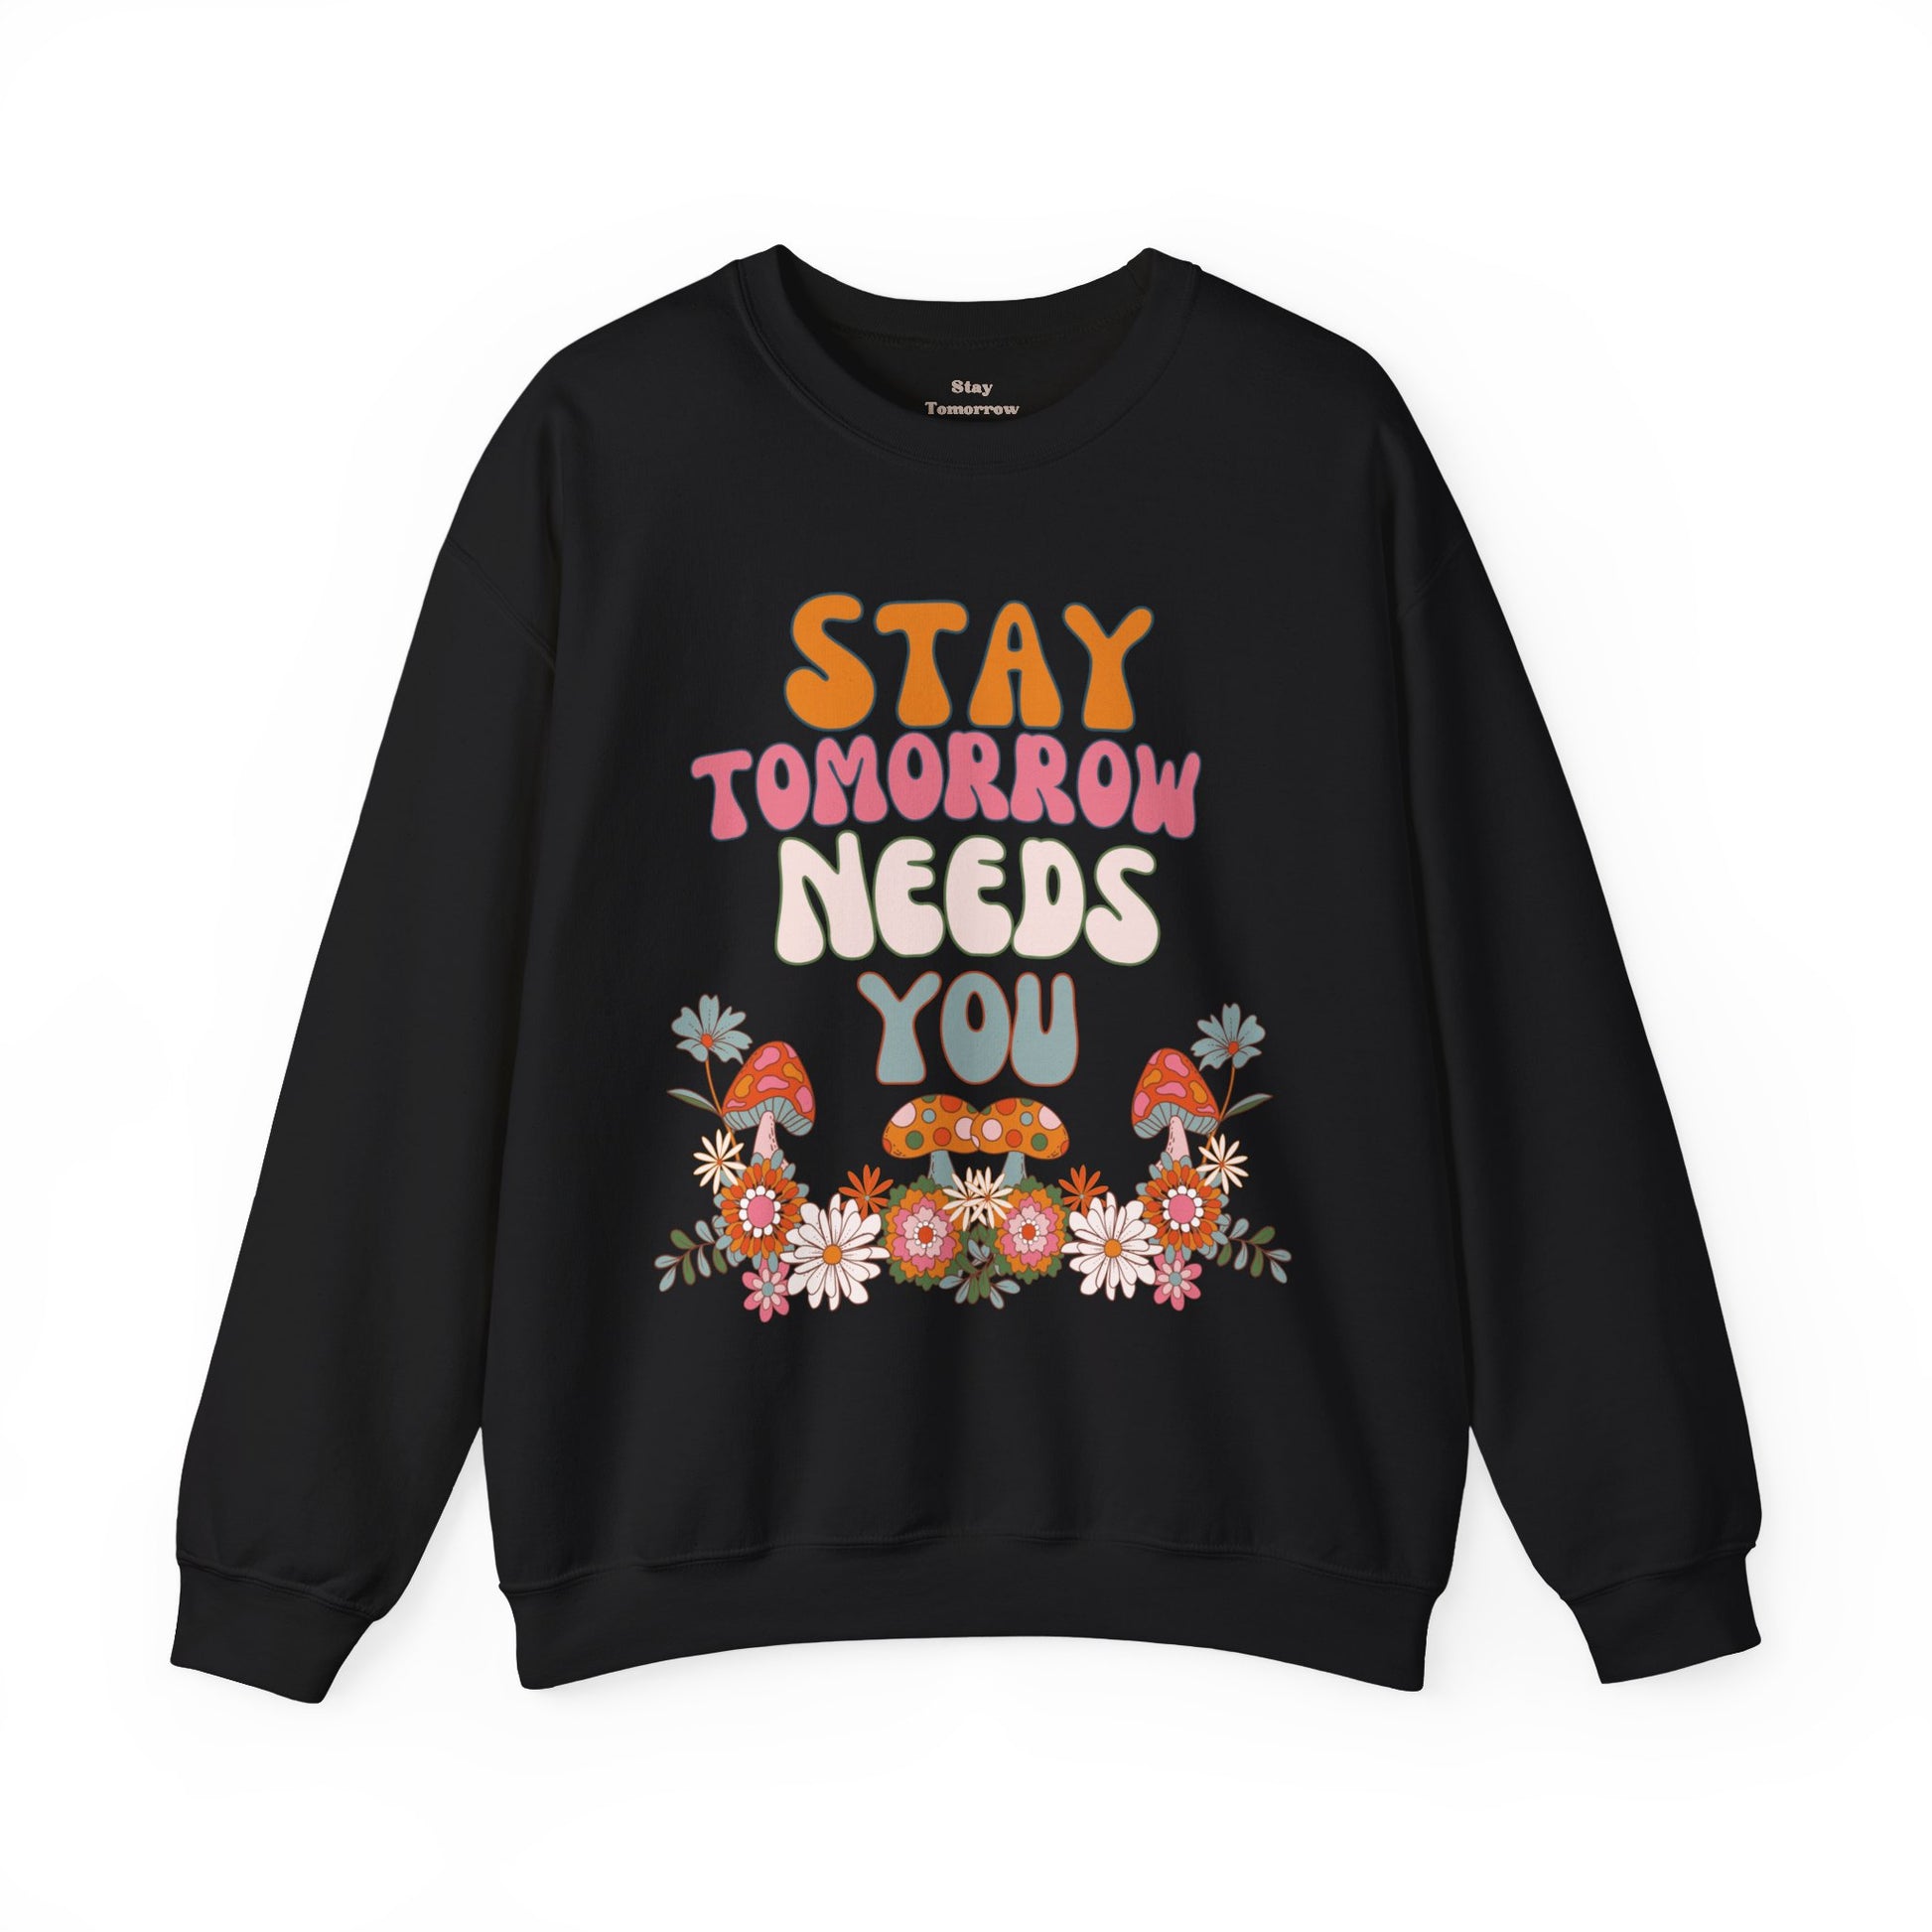 Retro Boho Summer Stay Tomorrow Needs You Sweatshirt Mental Health Awareness Suicide Prevention Mothers Day Fathers Day Gift Veterans Support Military Gift - Stay Tomorrow Needs You Retro Boho Summer Stay Tomorrow Needs You Sweatshirt Mental Health Awareness Suicide Prevention Mothers Day Fathers Day Gift Veterans Support Military Gift